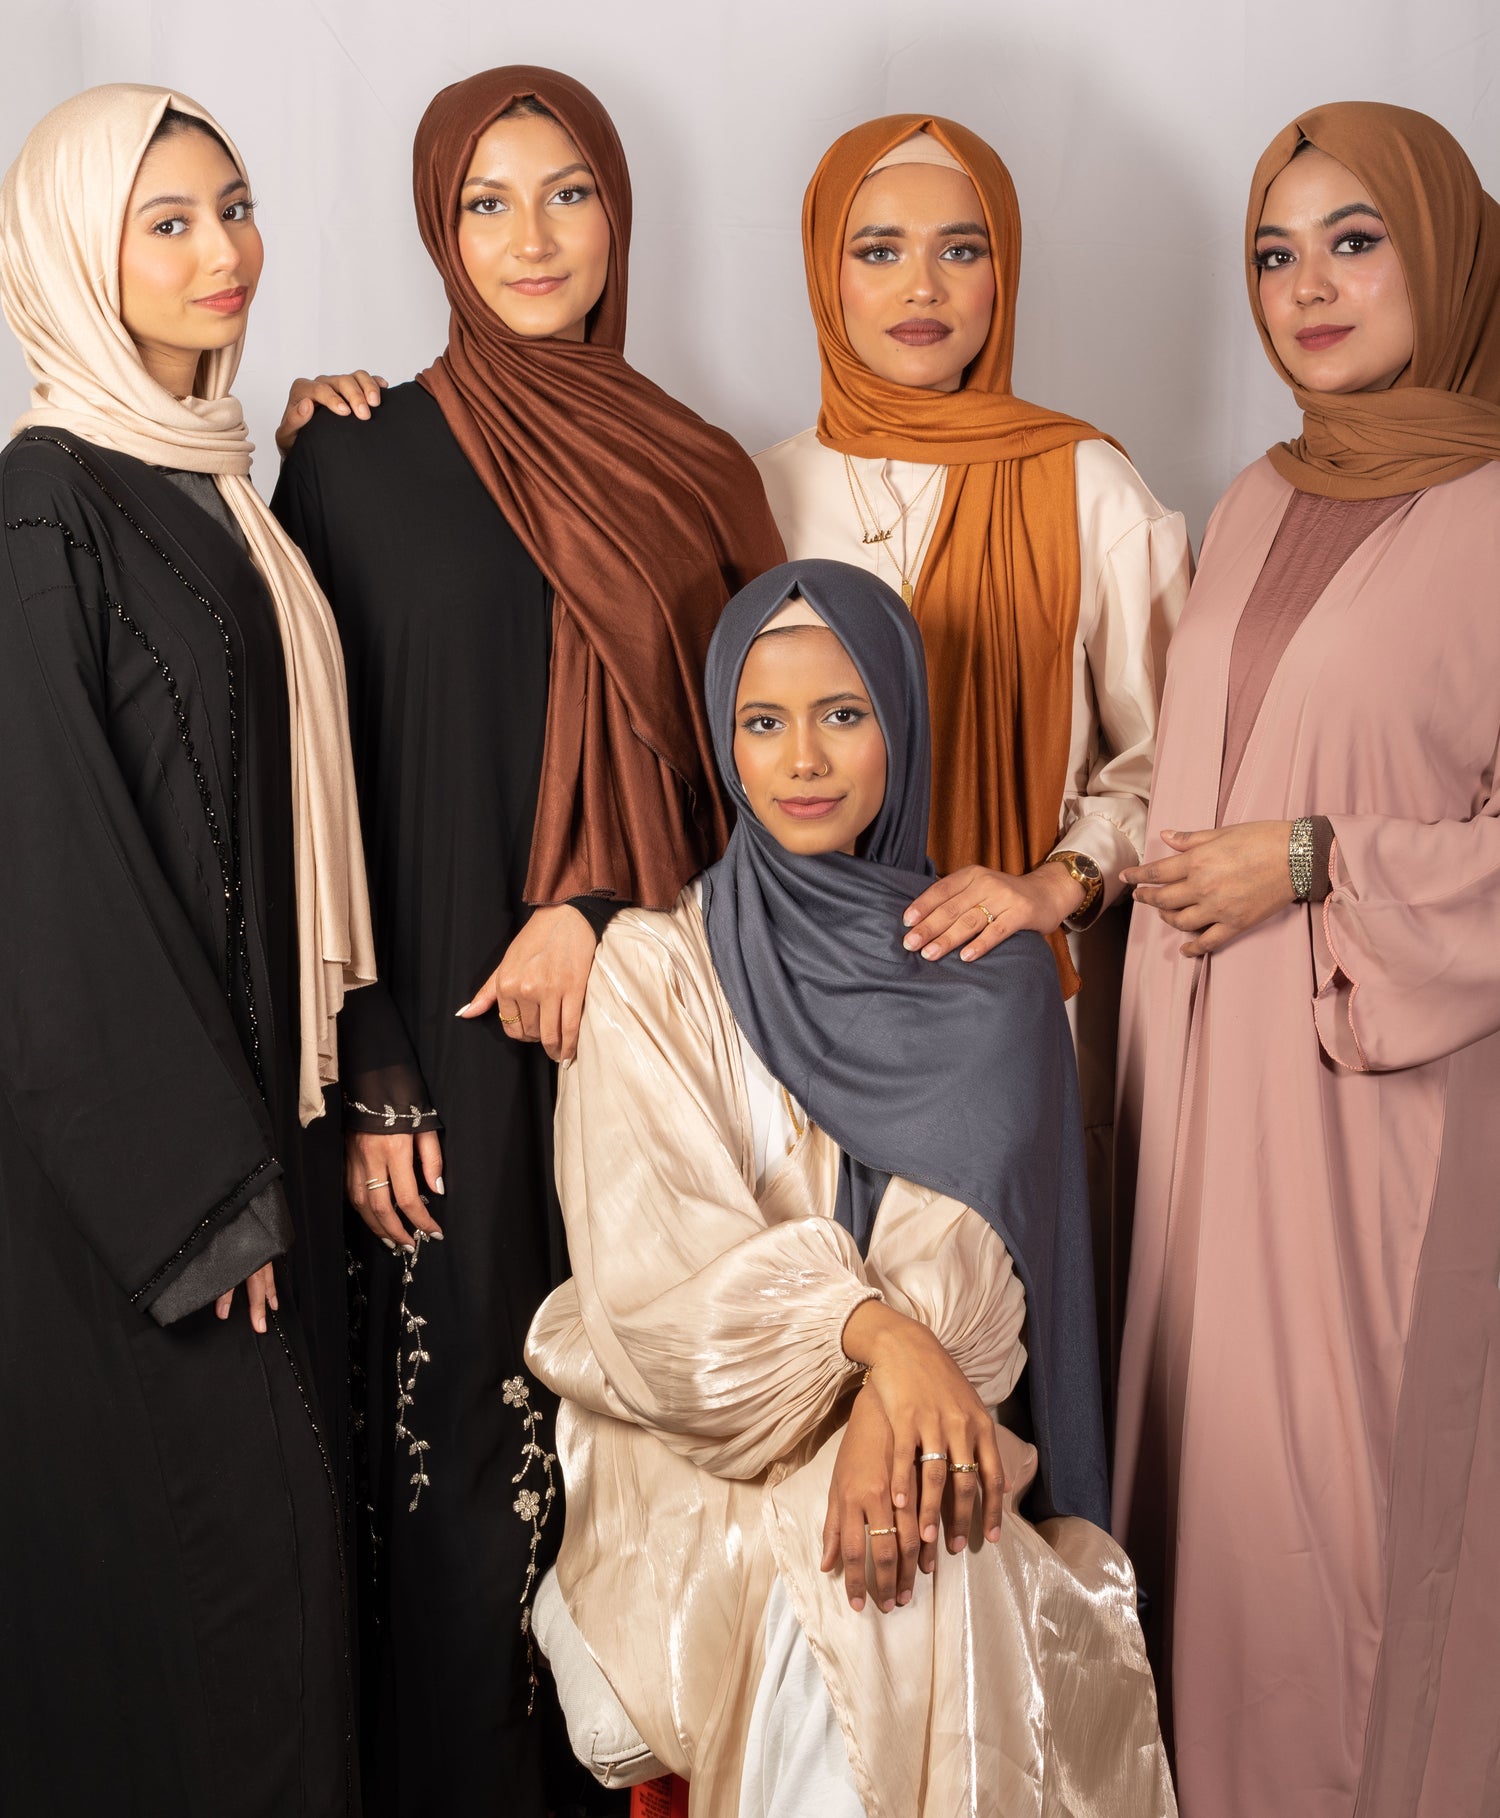 Islamic fashion, Modest clothing, Fragrant candles, Hijab pins collection, Magnetic hijab pins, Stylish scrunchies, Satin-lined undercap, Traditional keffiyeh, Abaya designs, Elegant hijab accessories, Modest wear trends, Hijab fashion essentials